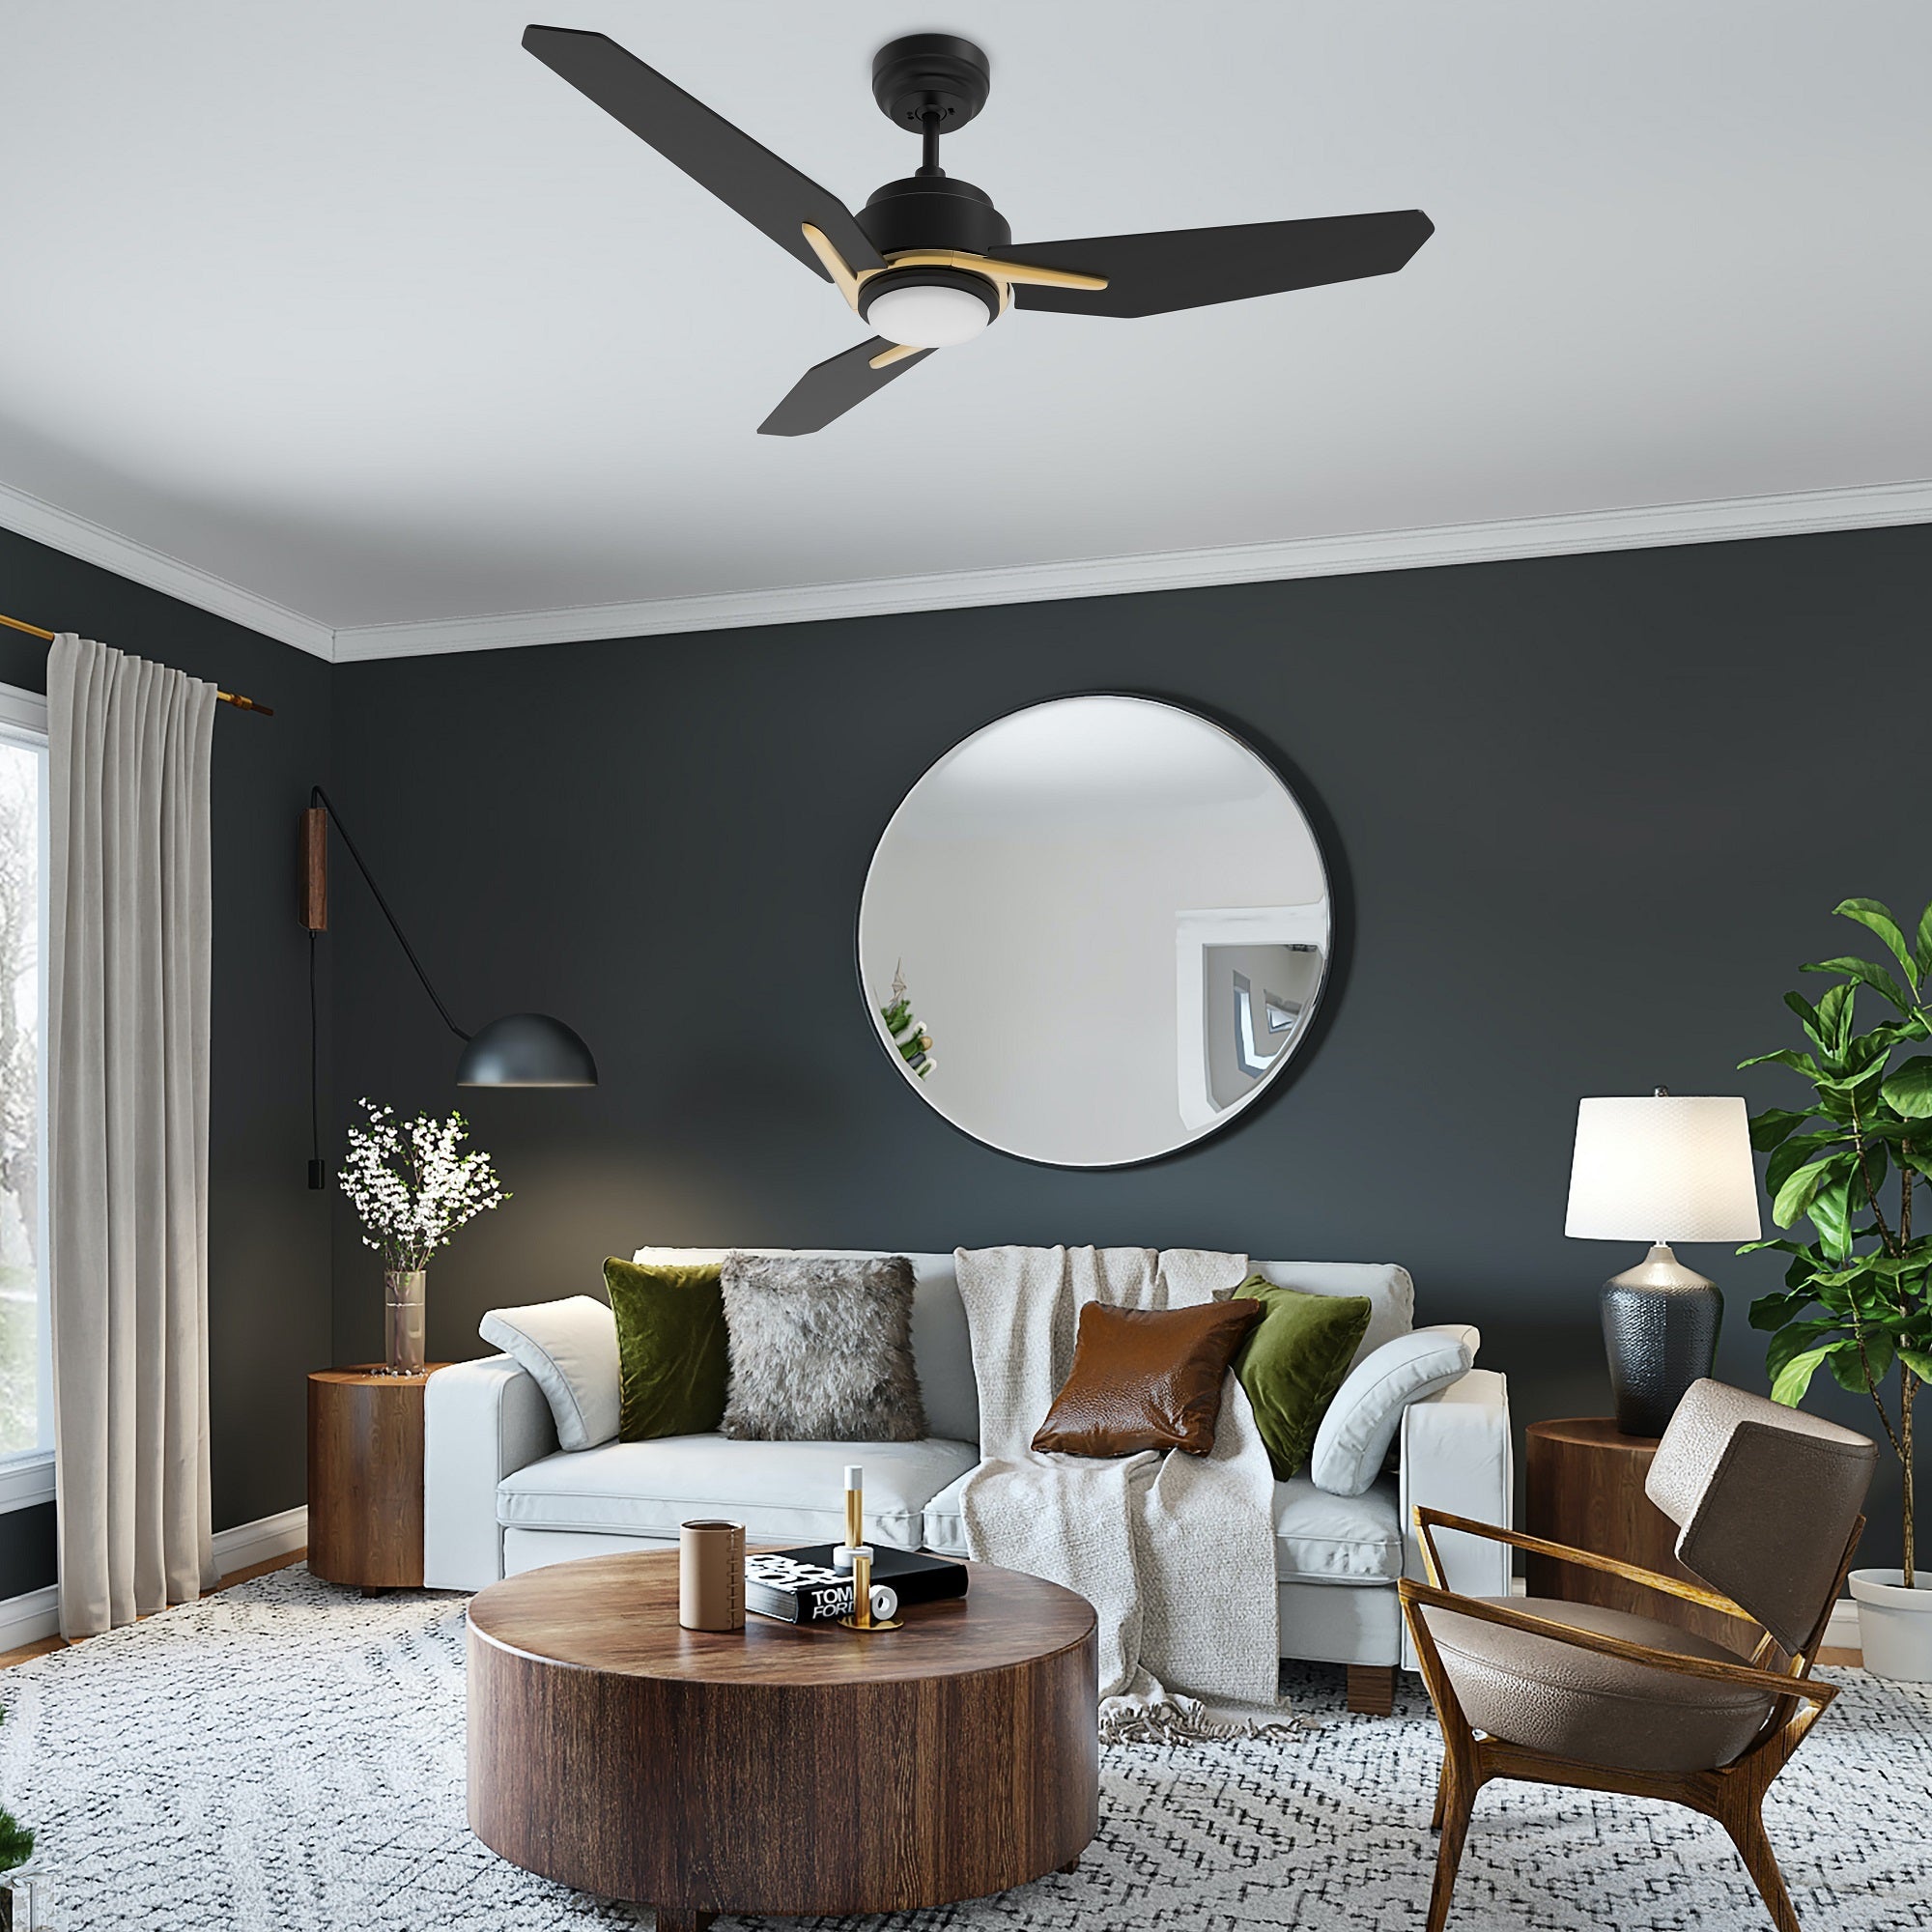 Smafan Tilbury 48'' smart ceiling fan fan features Remote control, Wi-Fi apps, Siri Shortcut and Voice control technology (compatible with Amazon Alexa and Google Home Assistant ) to set fan preferences.#color_Black